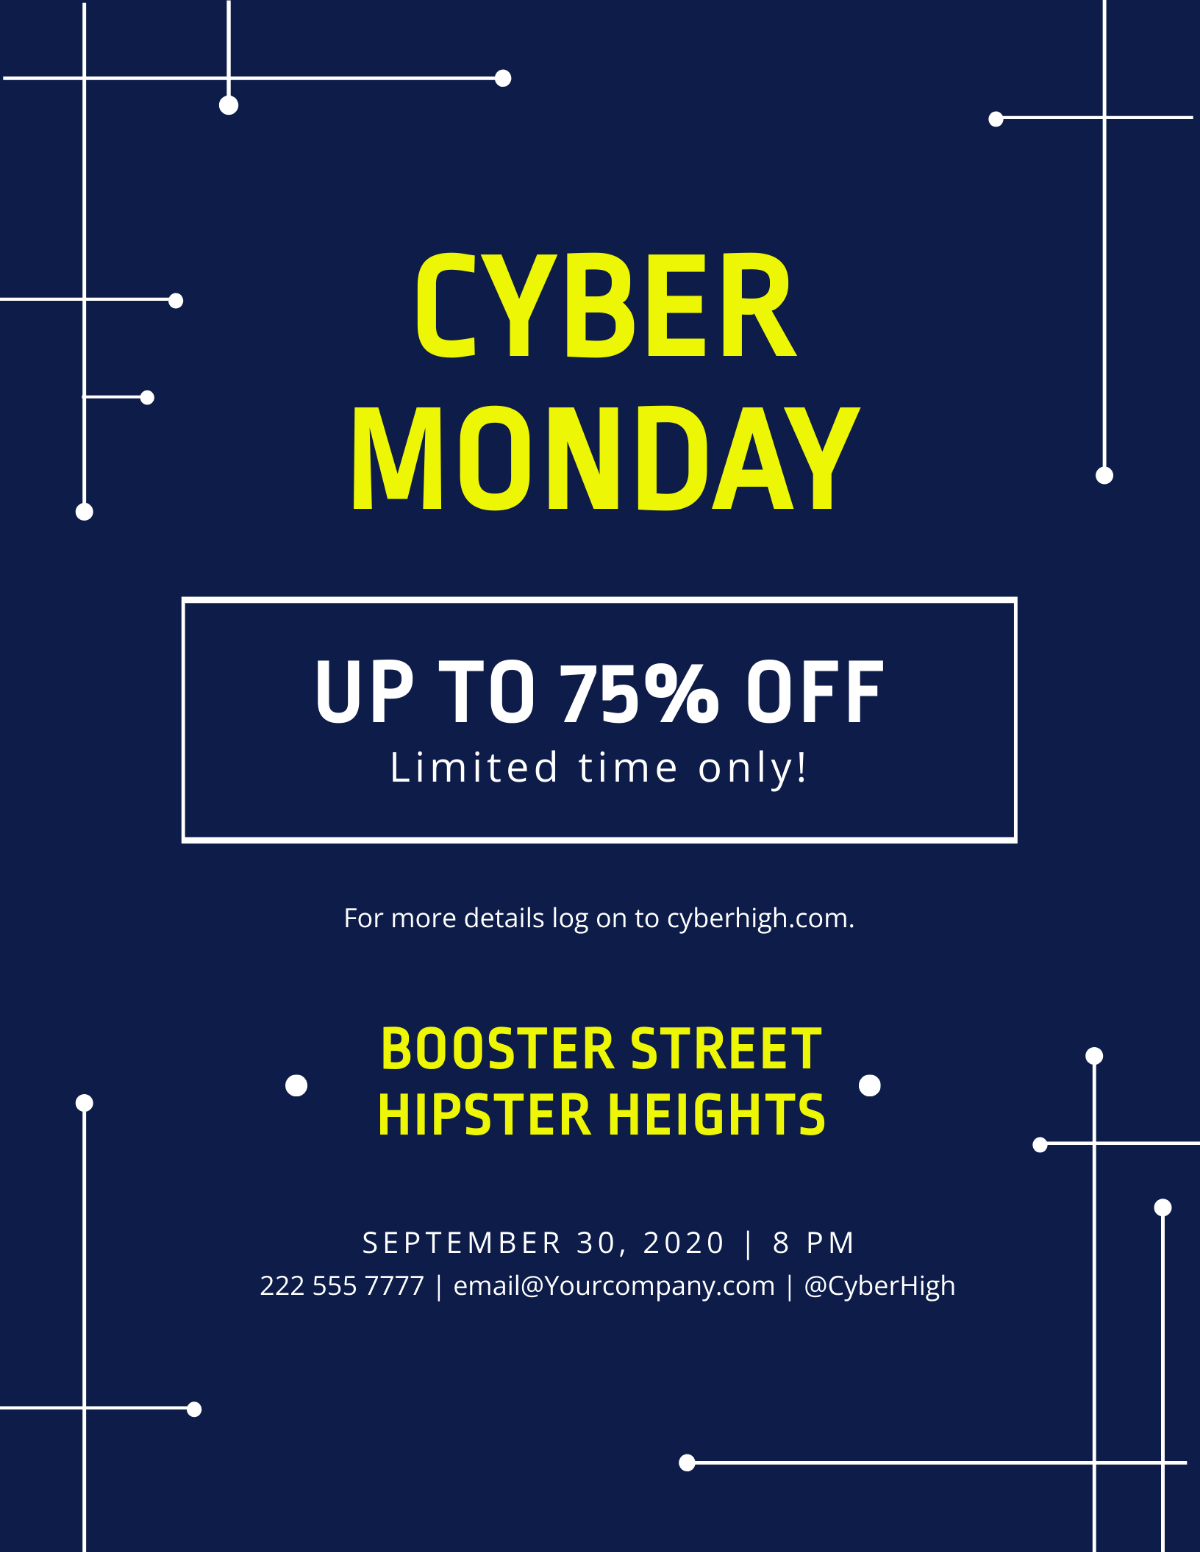 Cyber Monday Discount Flyer